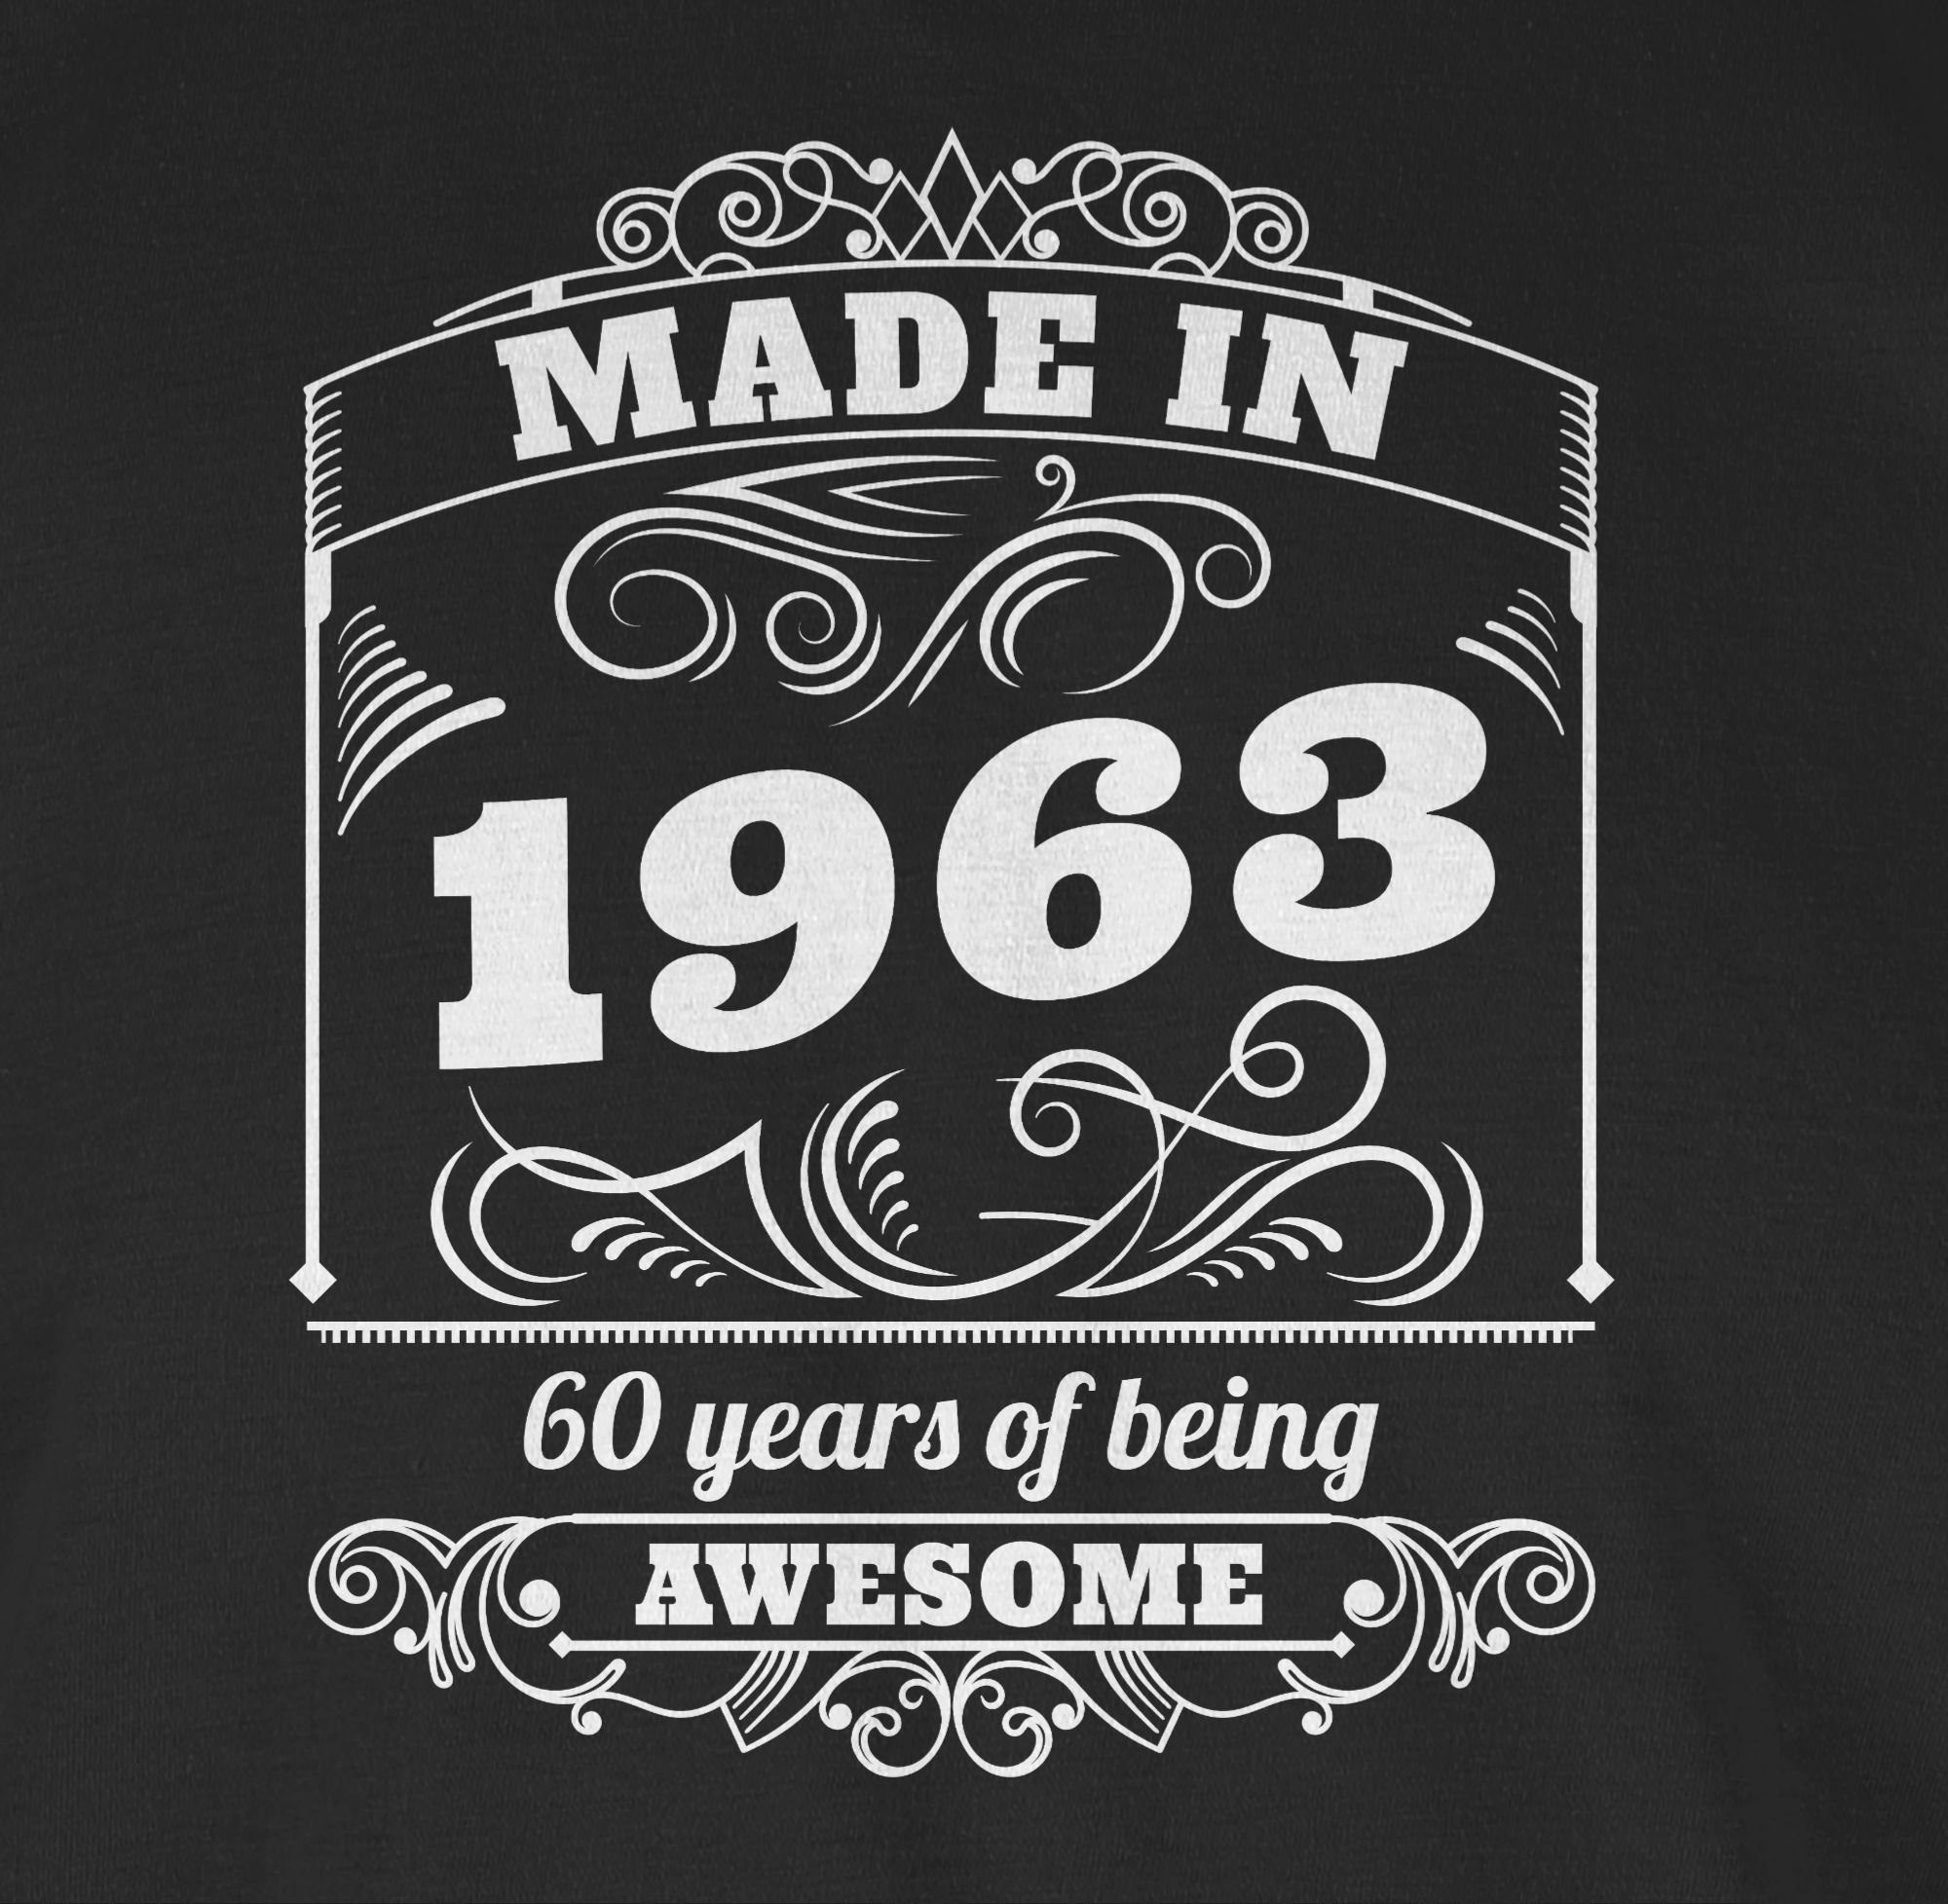 Shirtracer T-Shirt Made in 1 Sixty 1963 years awesome Schwarz Geburtstag 60. being of